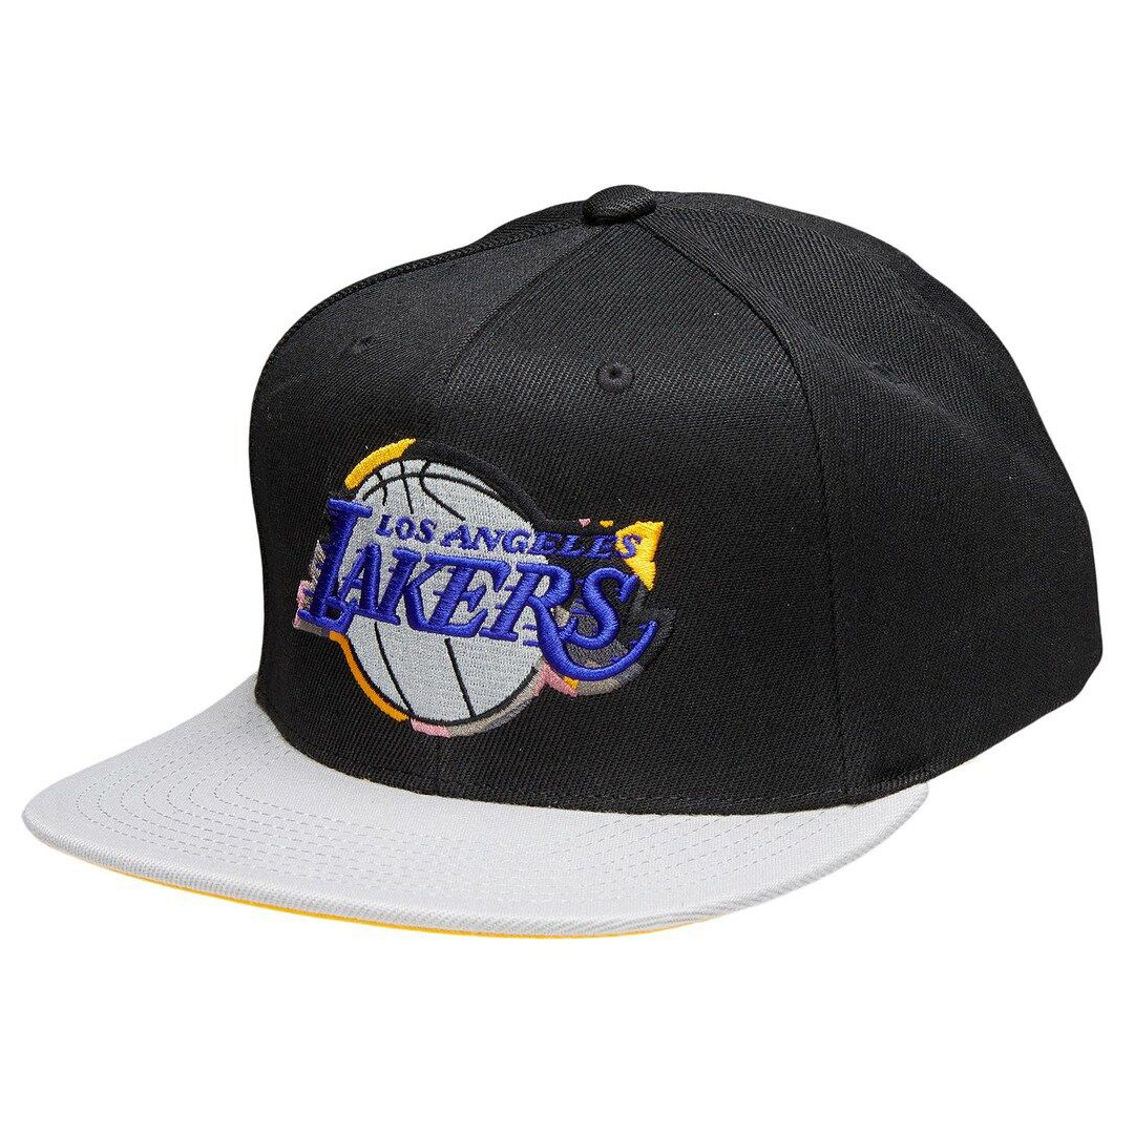 Los Angeles LA Lakers Black Hat Cap Ultra Game Snapback One Size Fits All  New